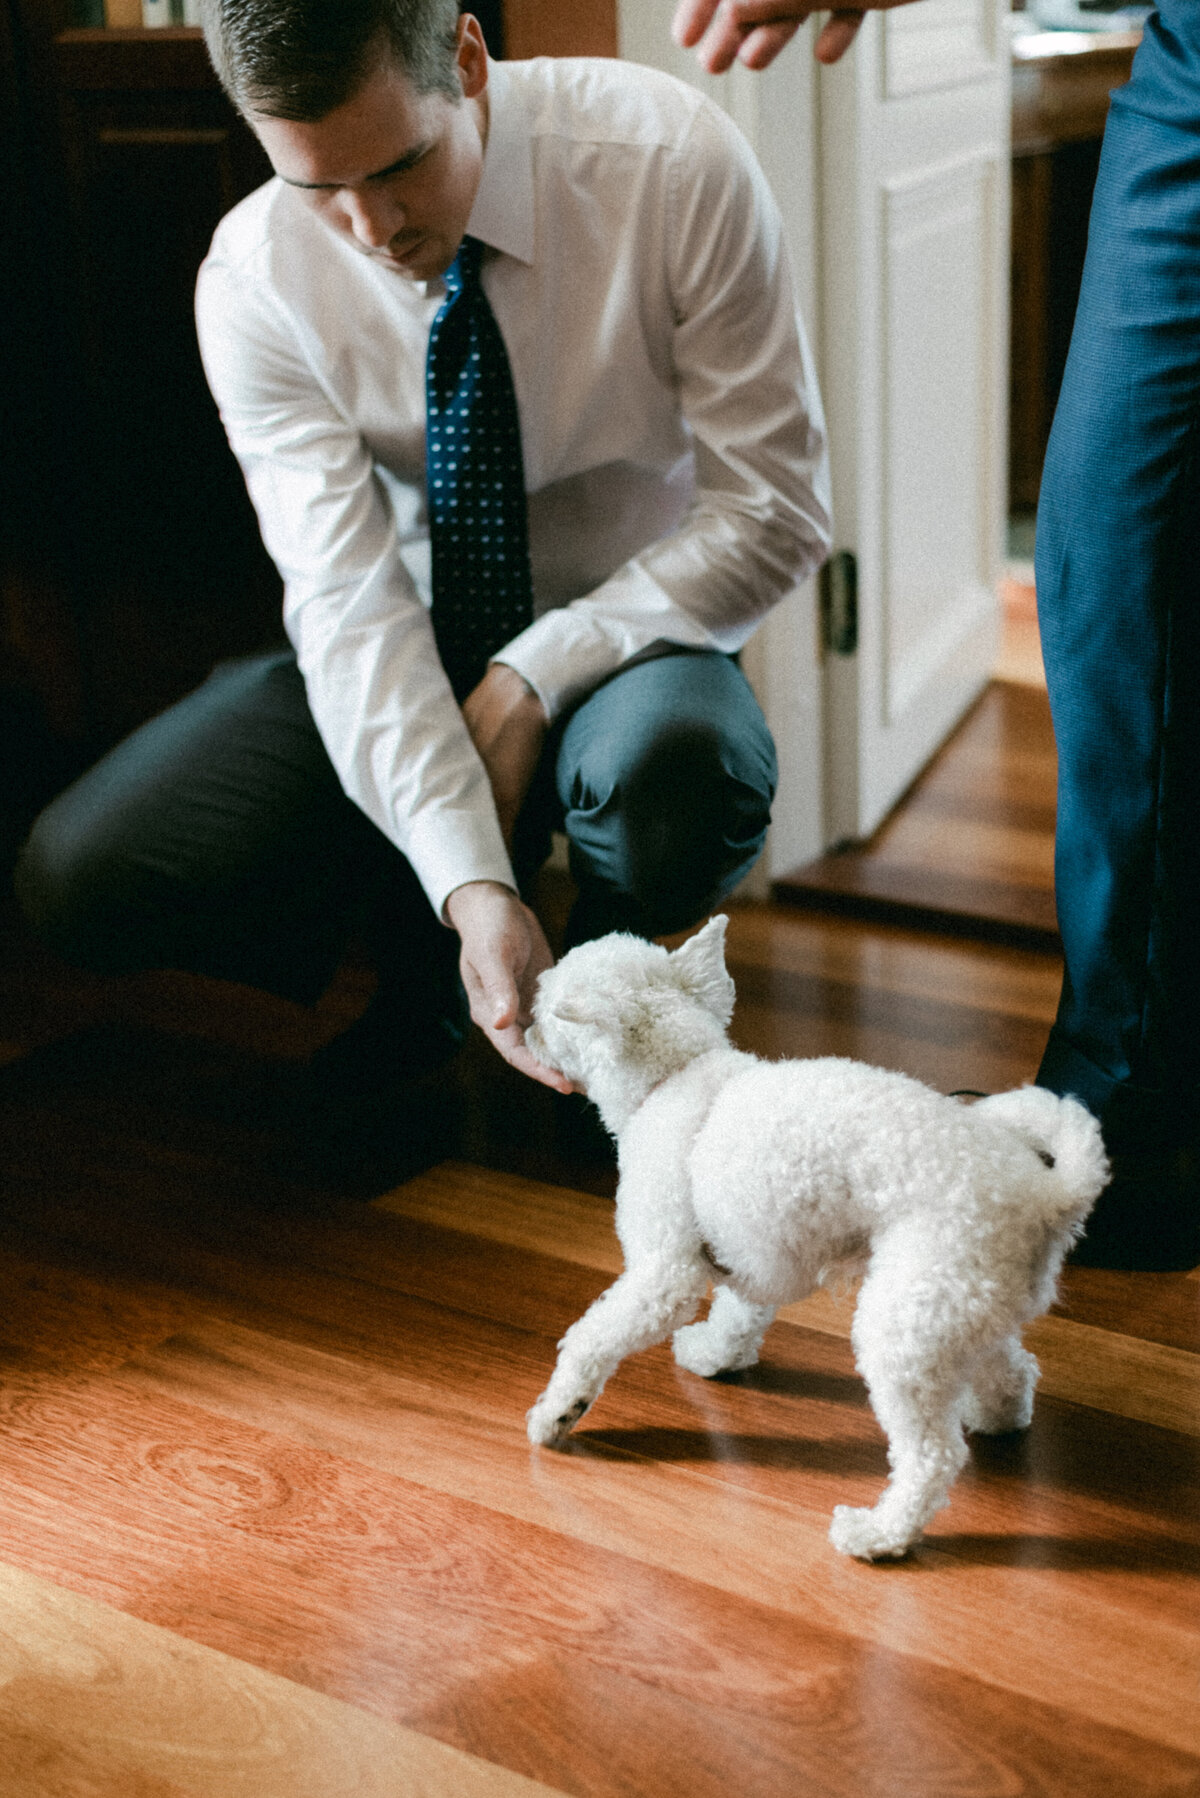 The dog is greeting the bestman in an image photographed by wedding photographer Hannika Gabrielsson.